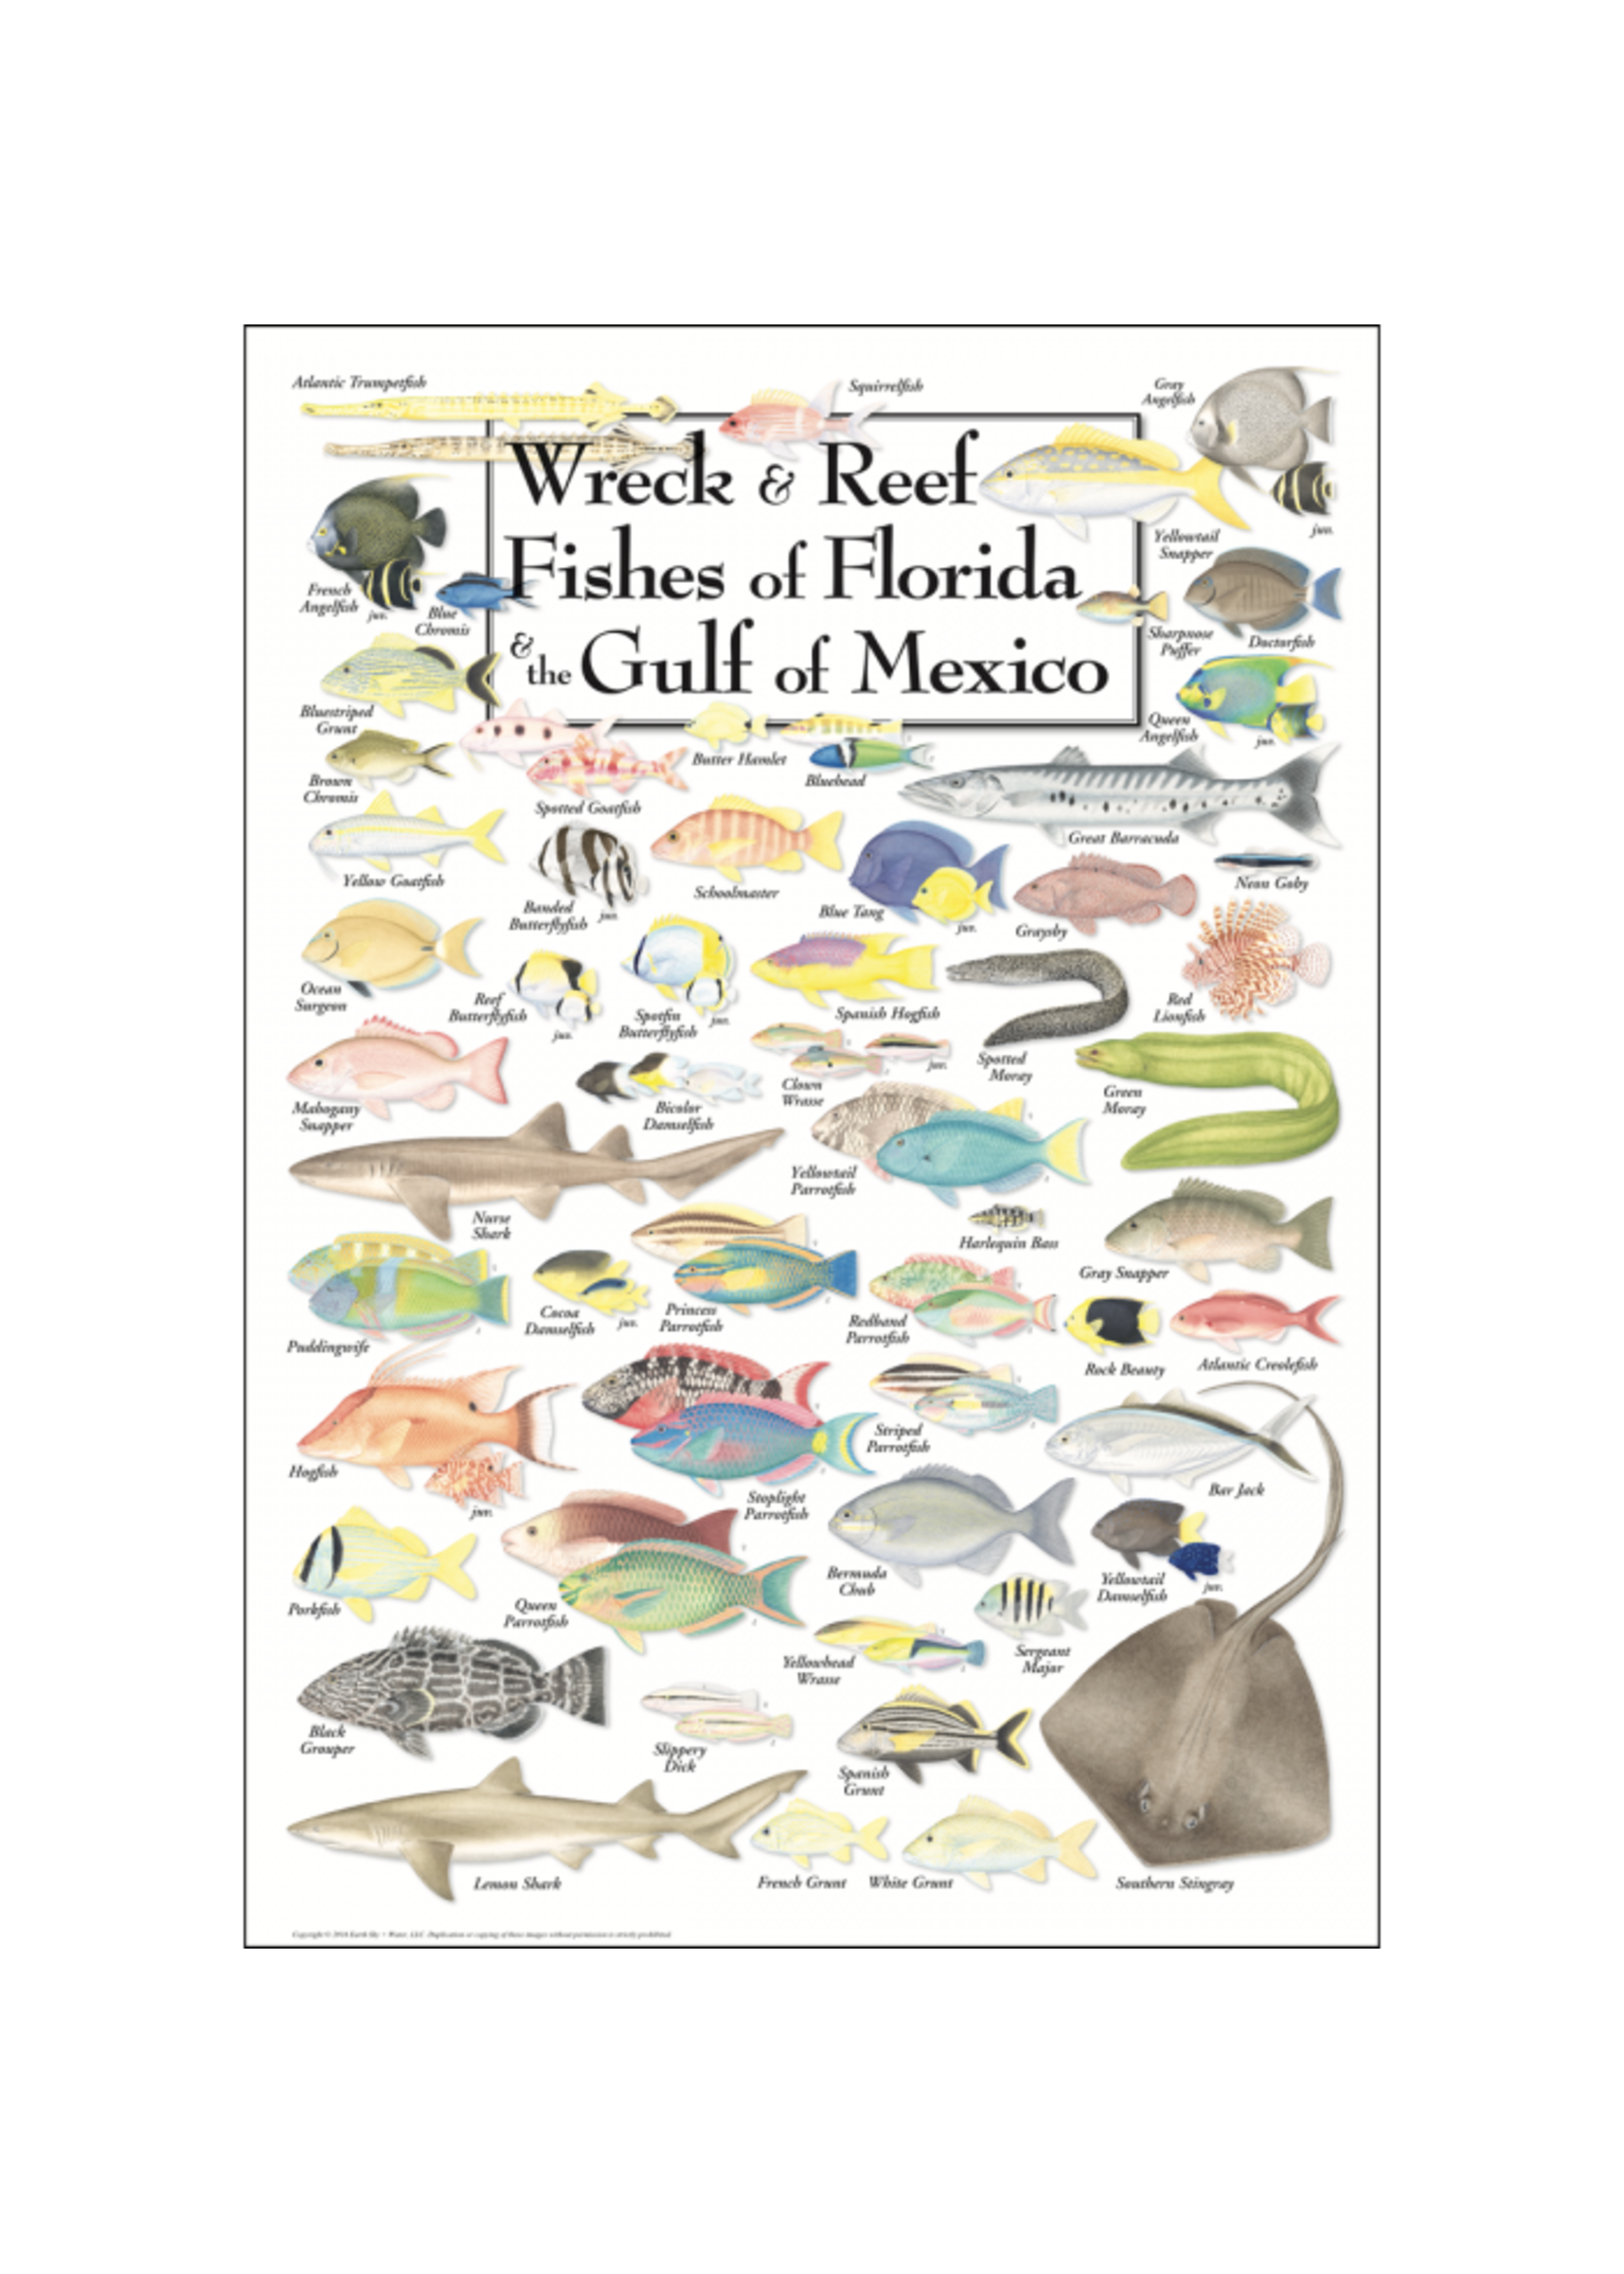 Earth Sky + Water POSTER Wreck & Reef Fishes of FL & Gulf